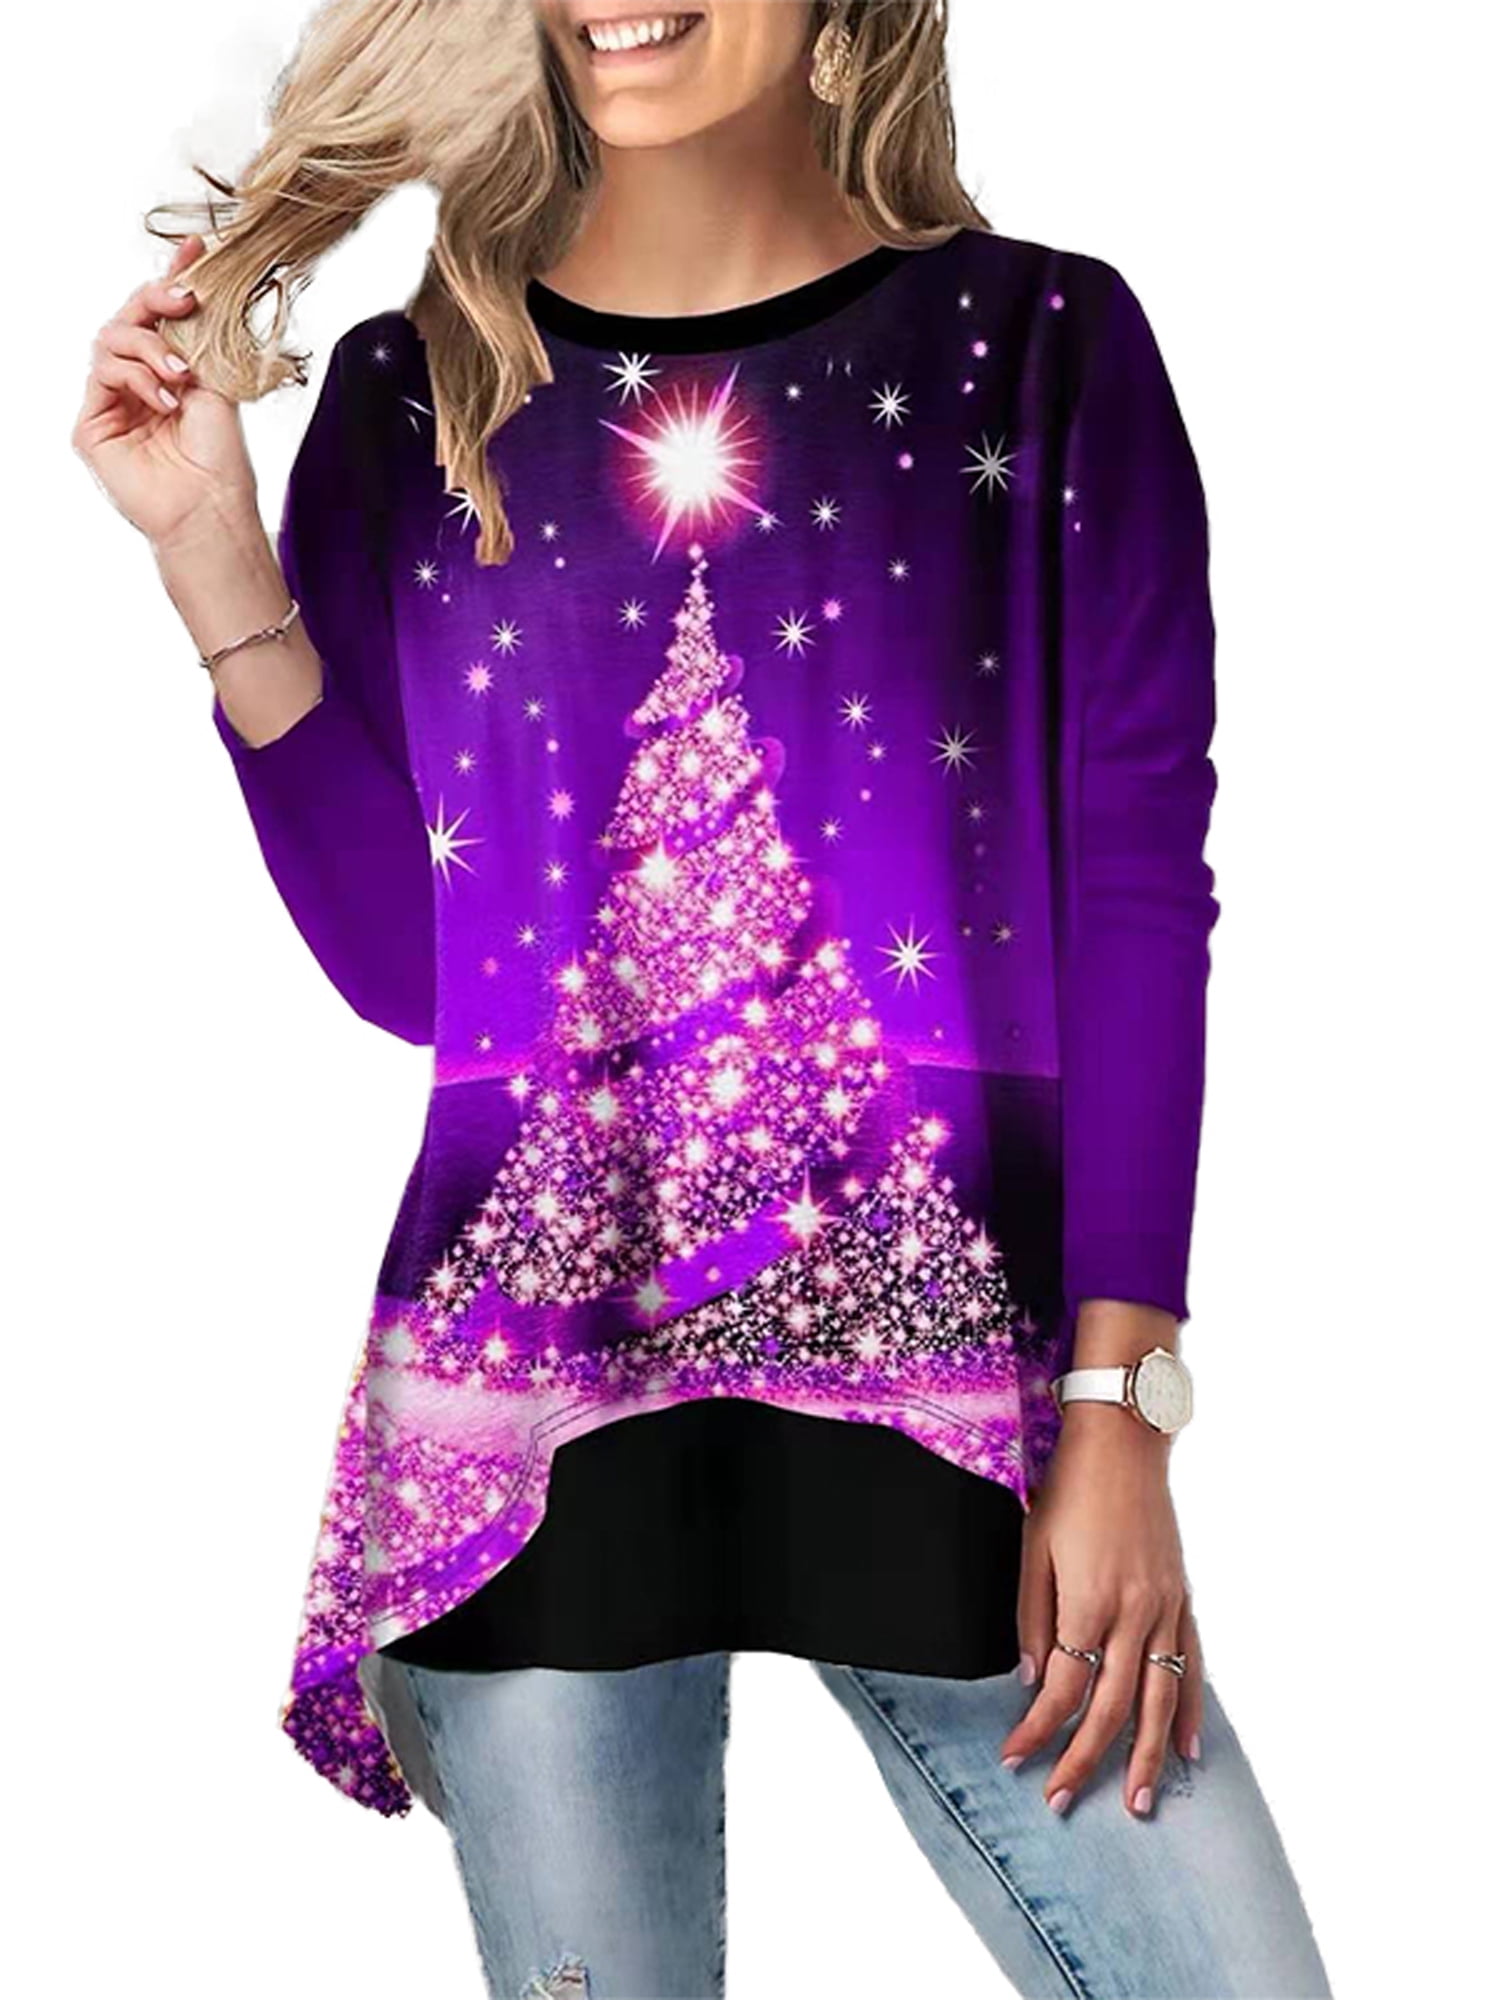 Women's Christmas Plus Size Tops Tunic Loose T Shirts Party Long Sleeve ...